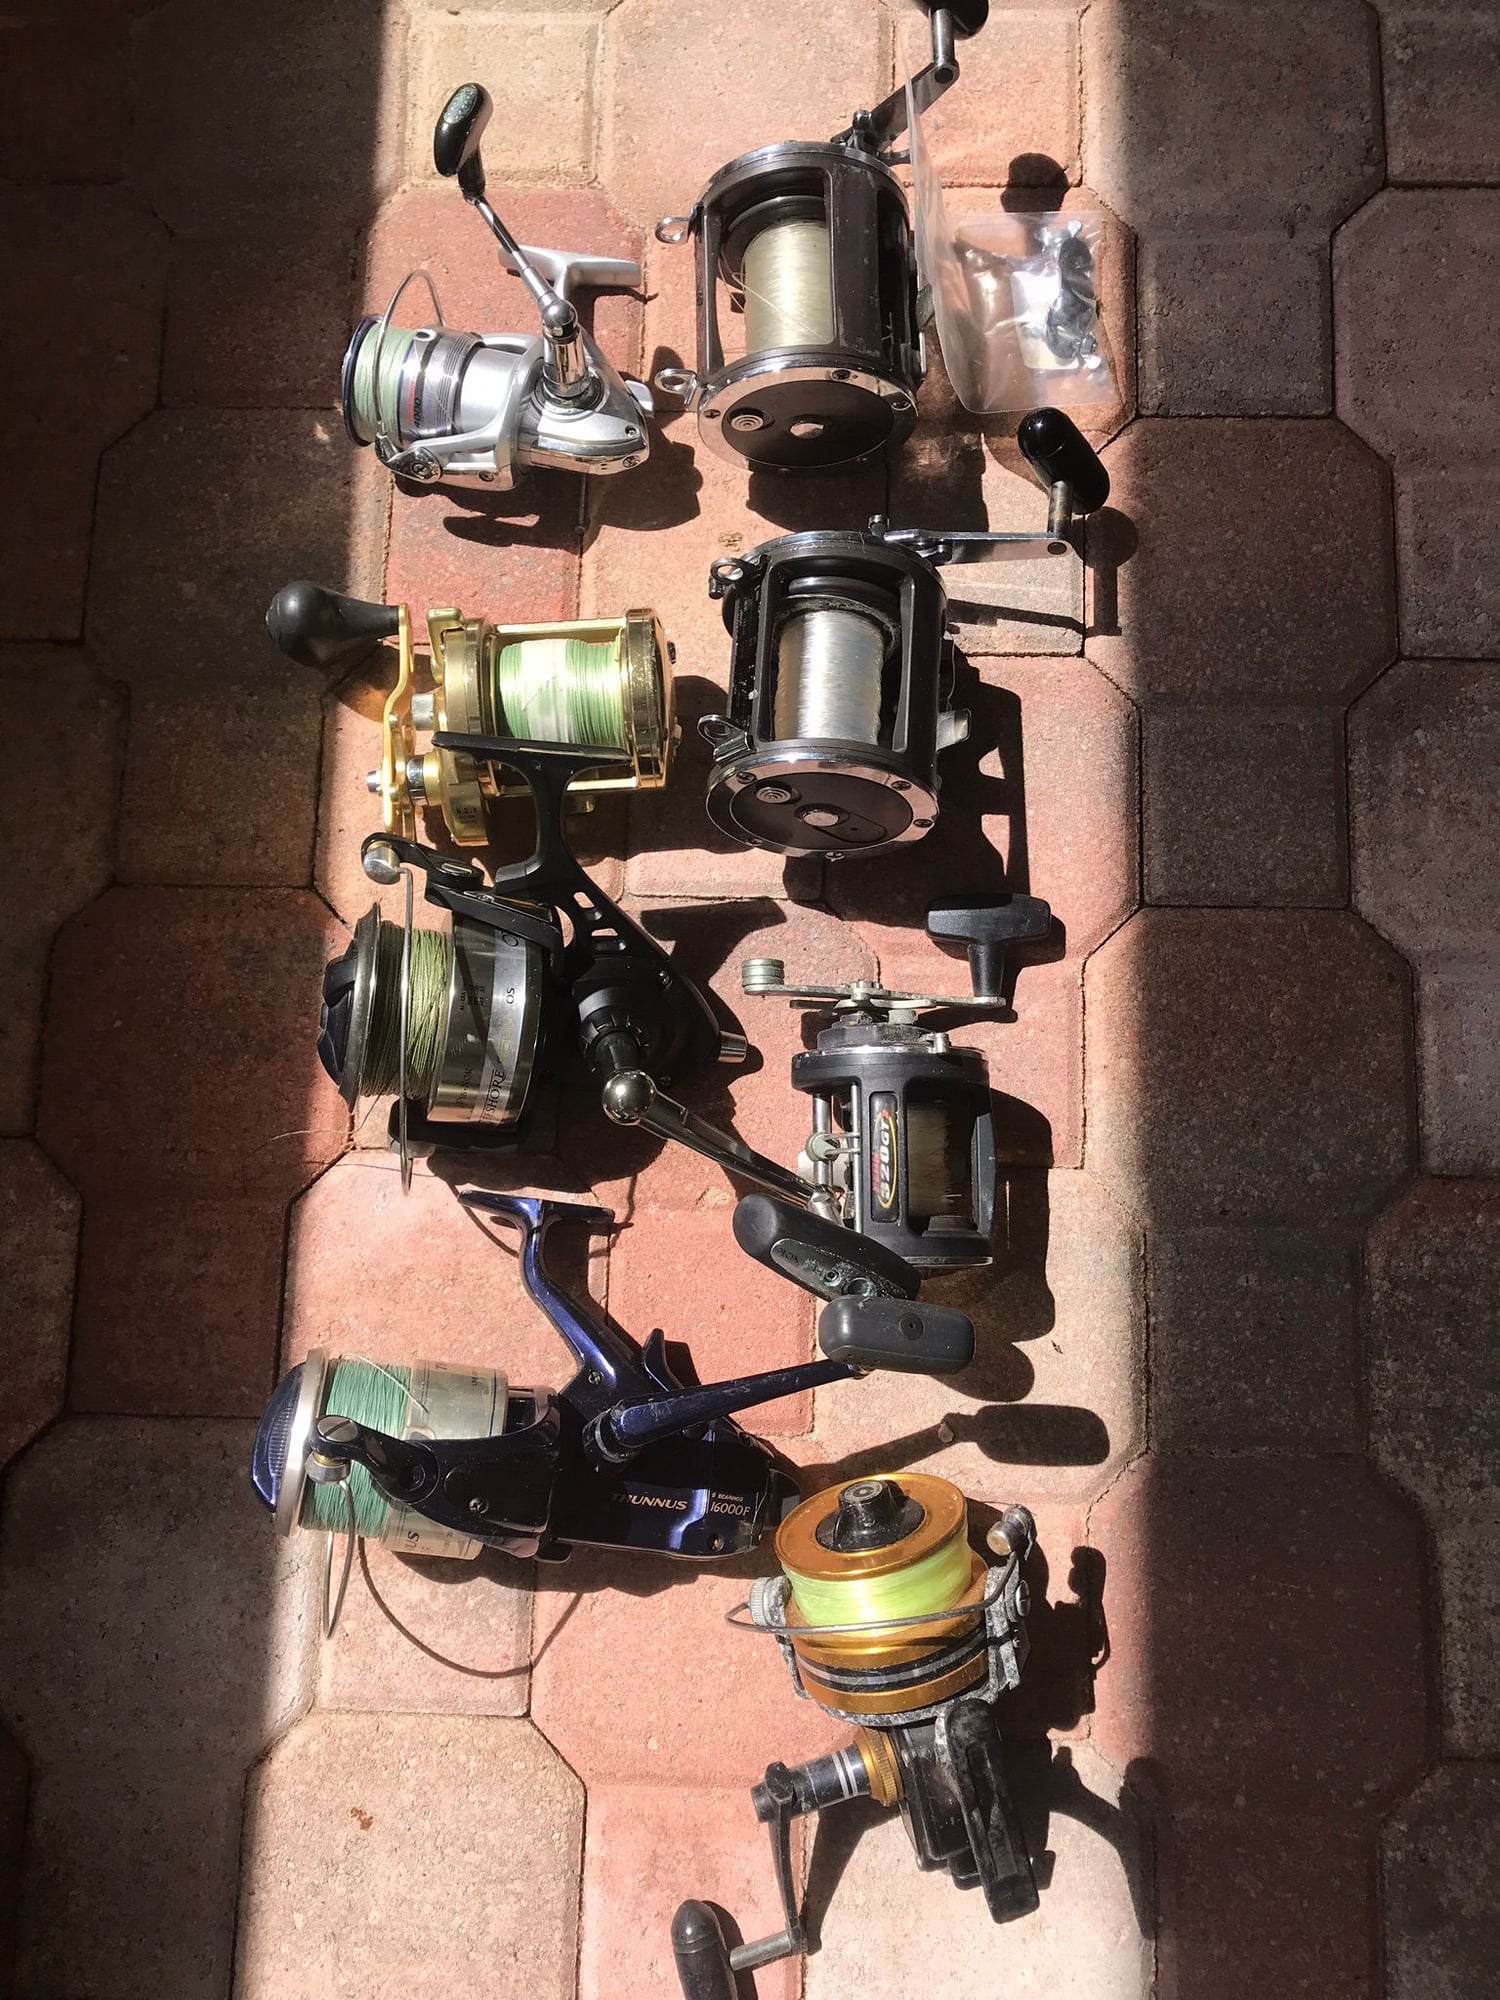 Huge garage clean out. (Trolling tackle, jigs, poppers, high speed wahoo  ,etcc) - The Hull Truth - Boating and Fishing Forum